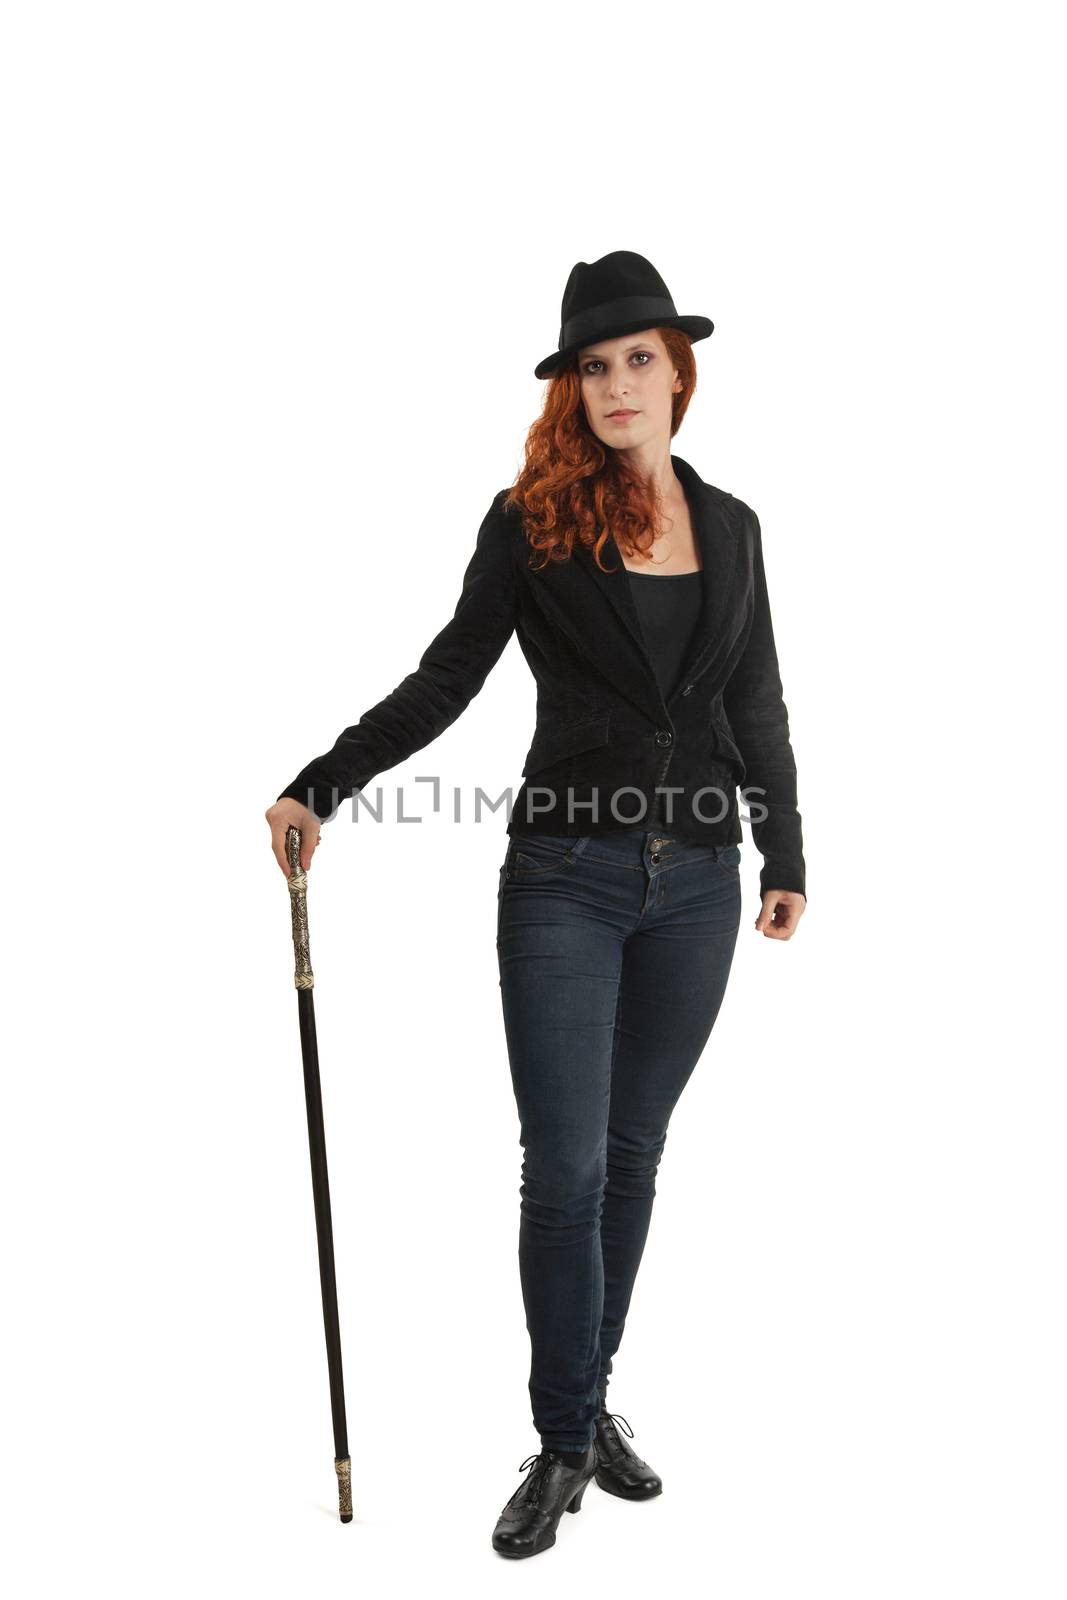 Portrait Of Female Magician Isolated Over White Background